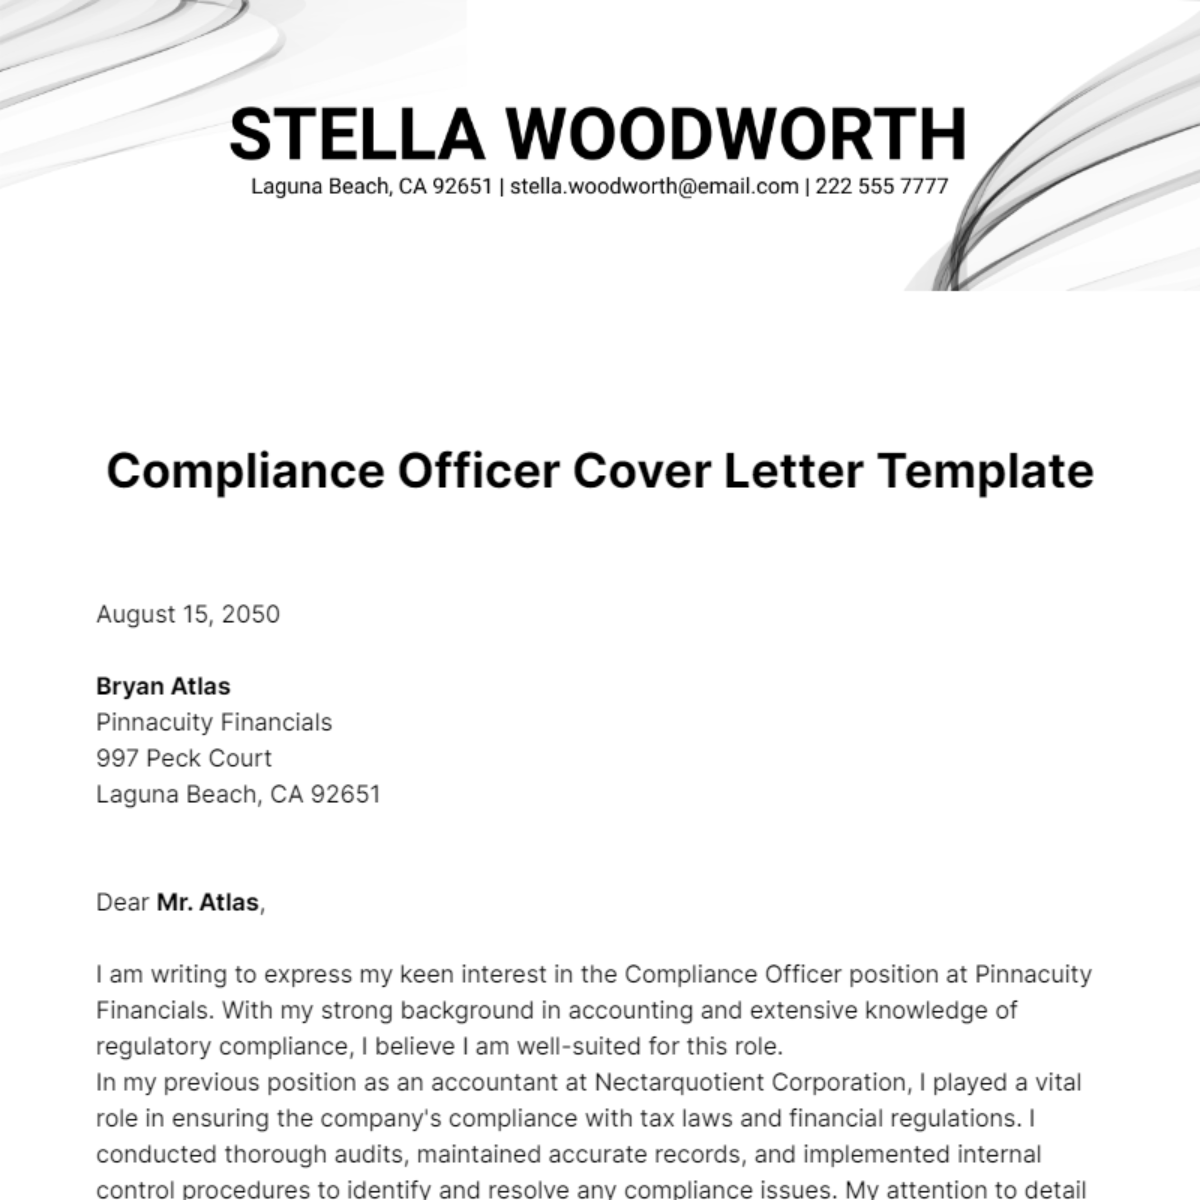 Compliance Officer Cover Letter Template